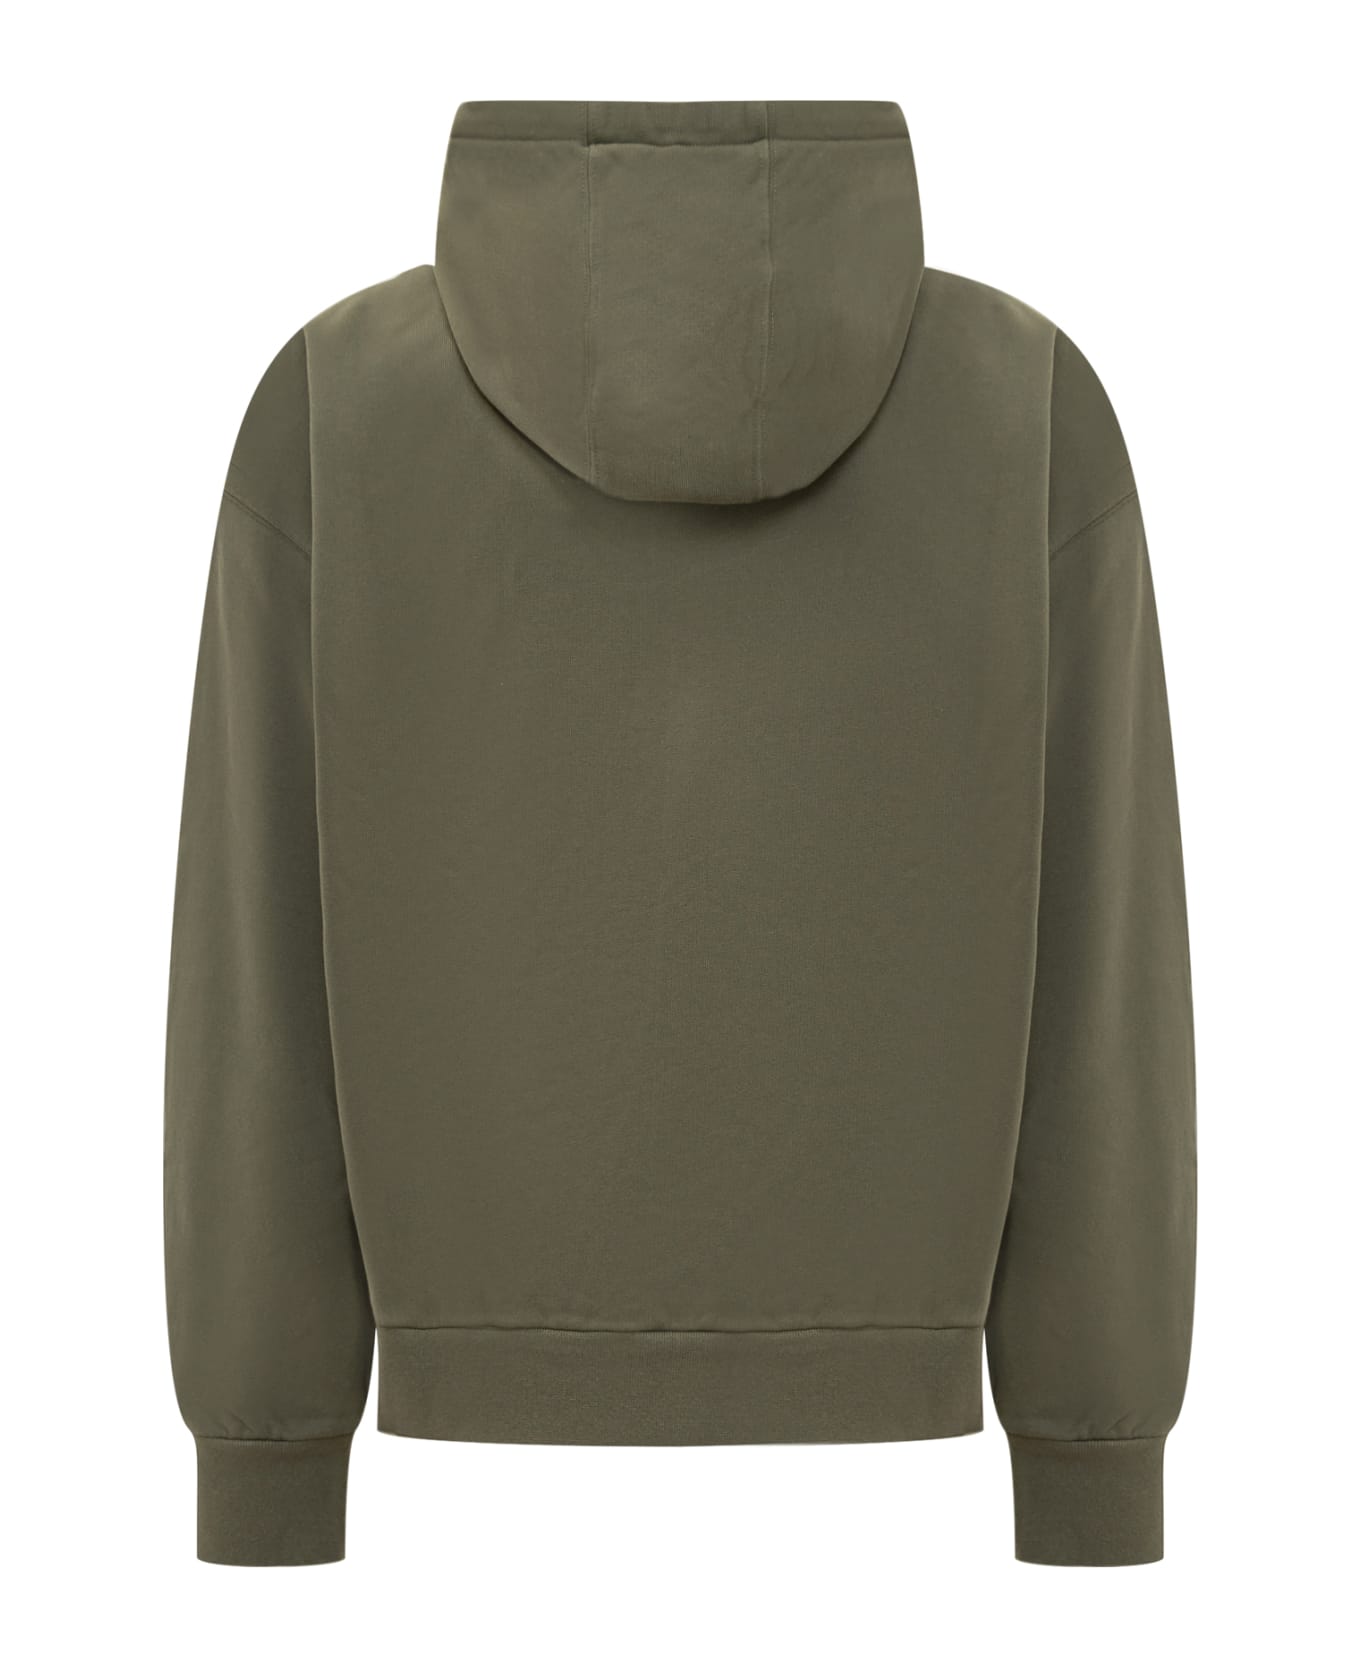 Givenchy Hoodie - OLIVE GREEN